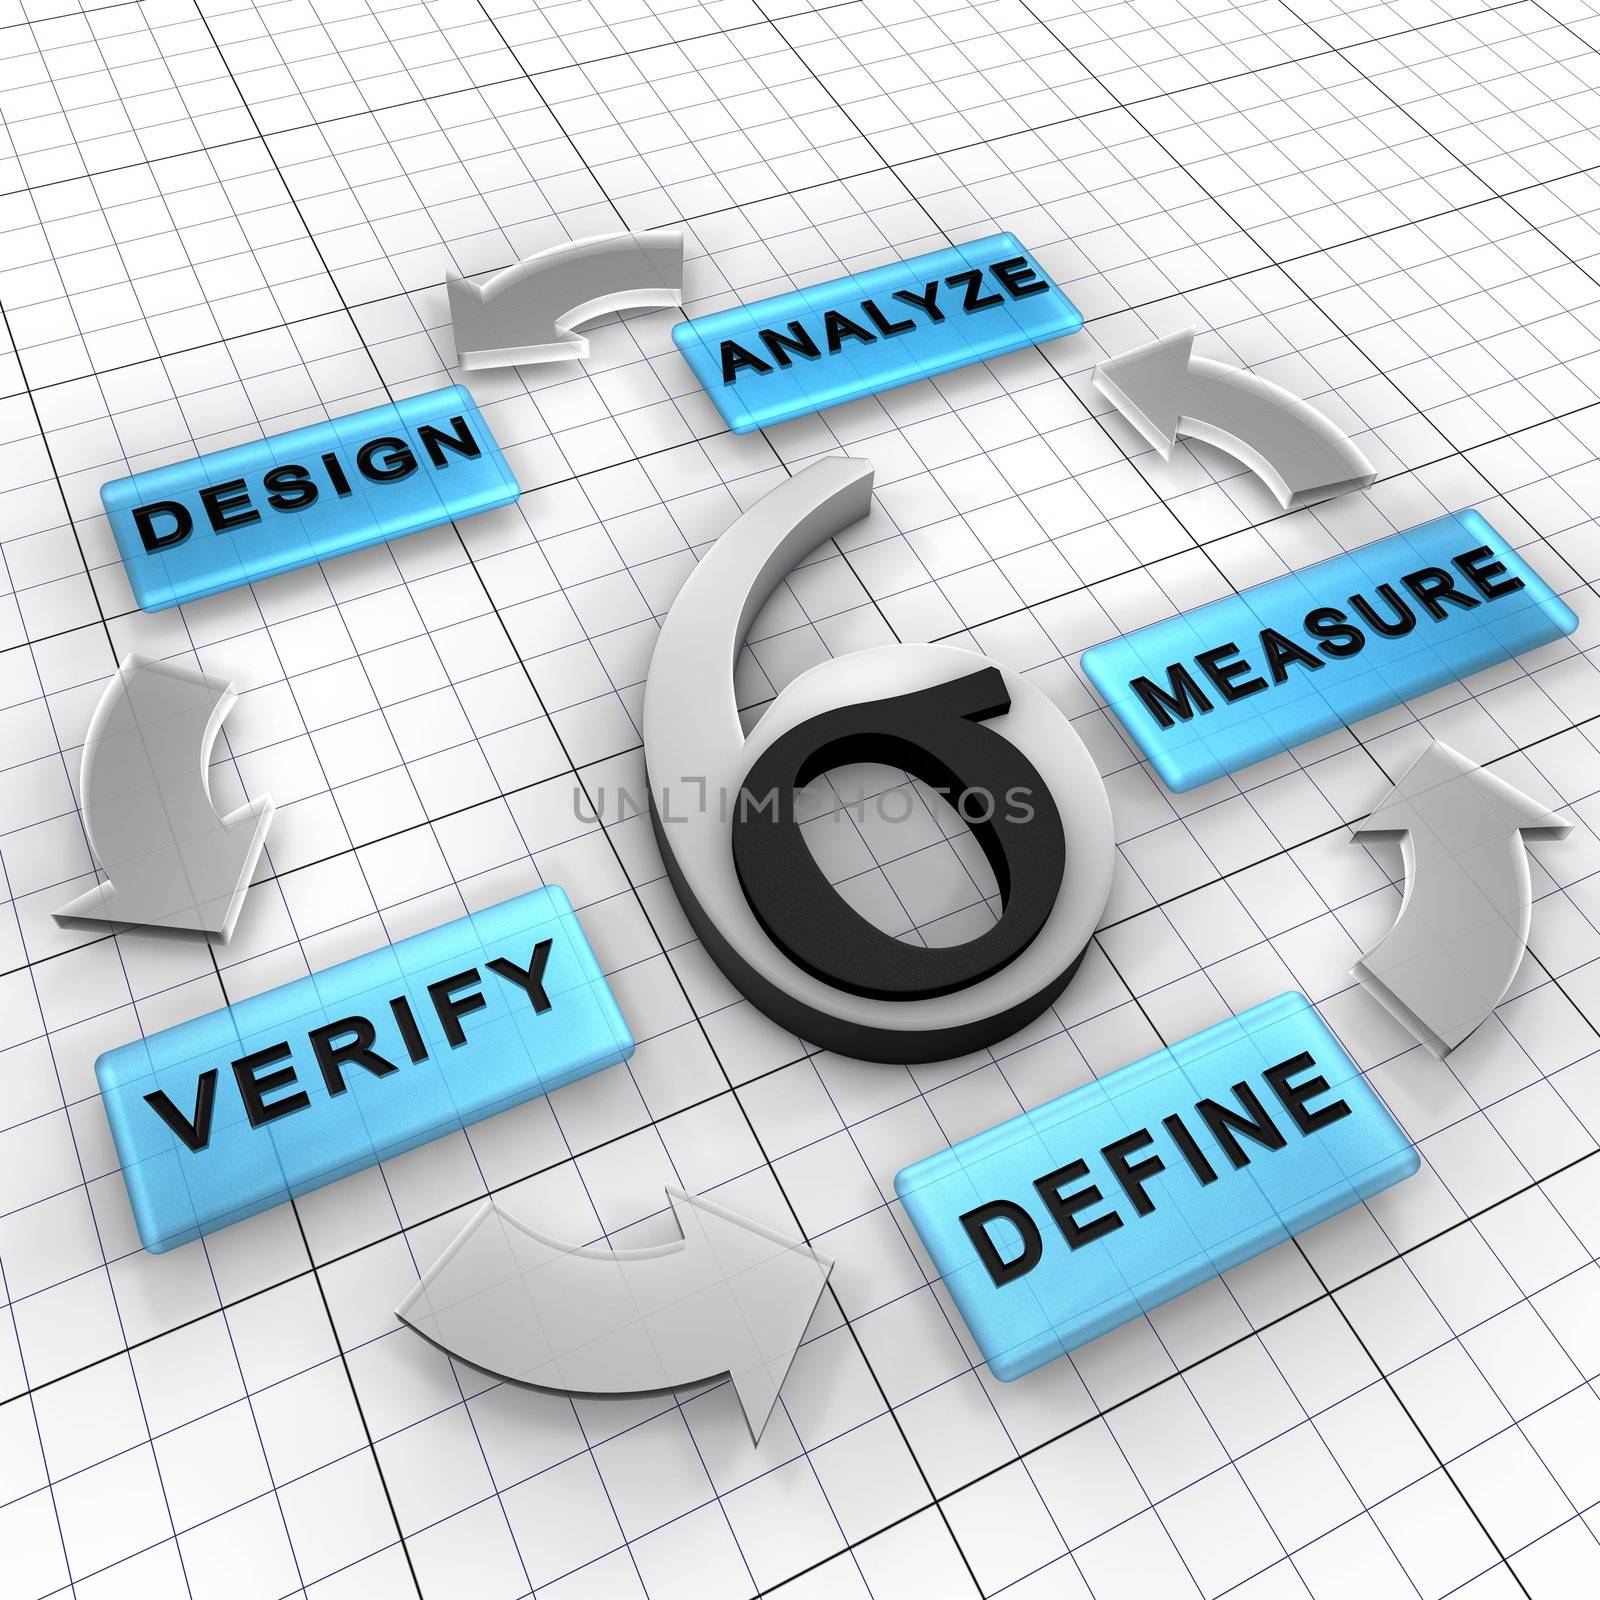 DMADV is a business management strategy for new project that has five steps: Define, Measure, Analyze, Design, Verify